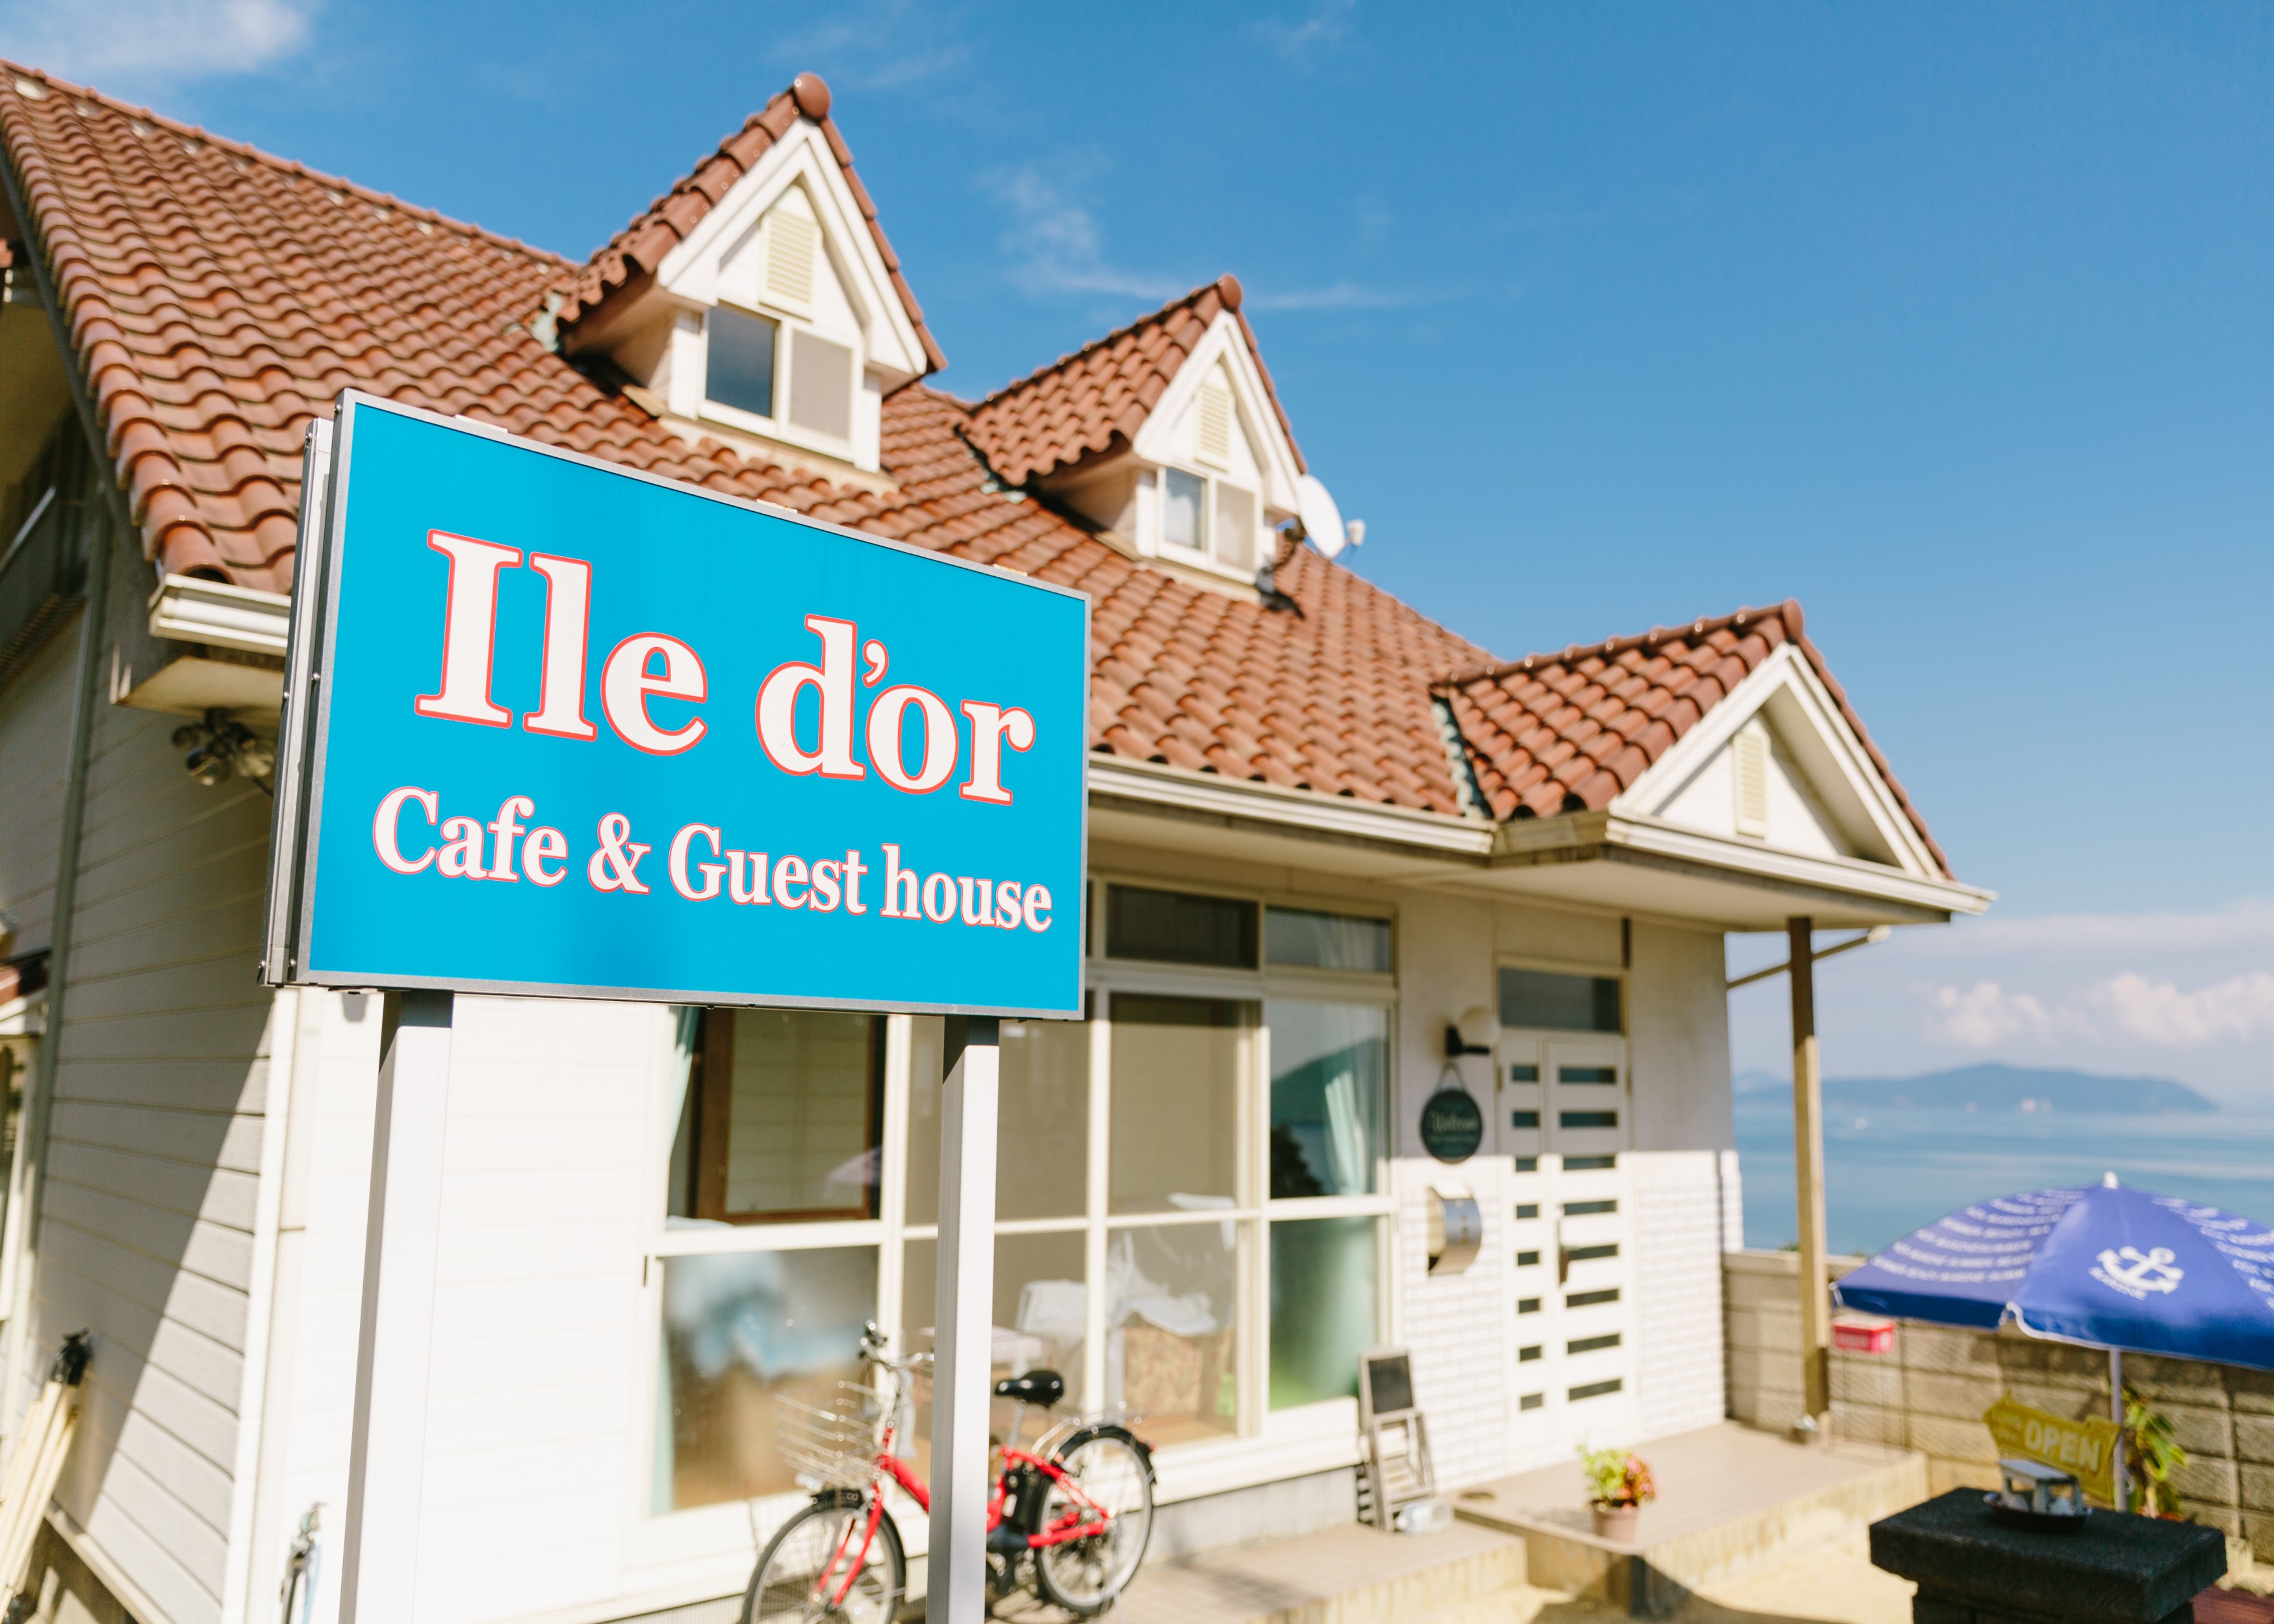 Ile d’or cafe&guesthouse <大飛島> image